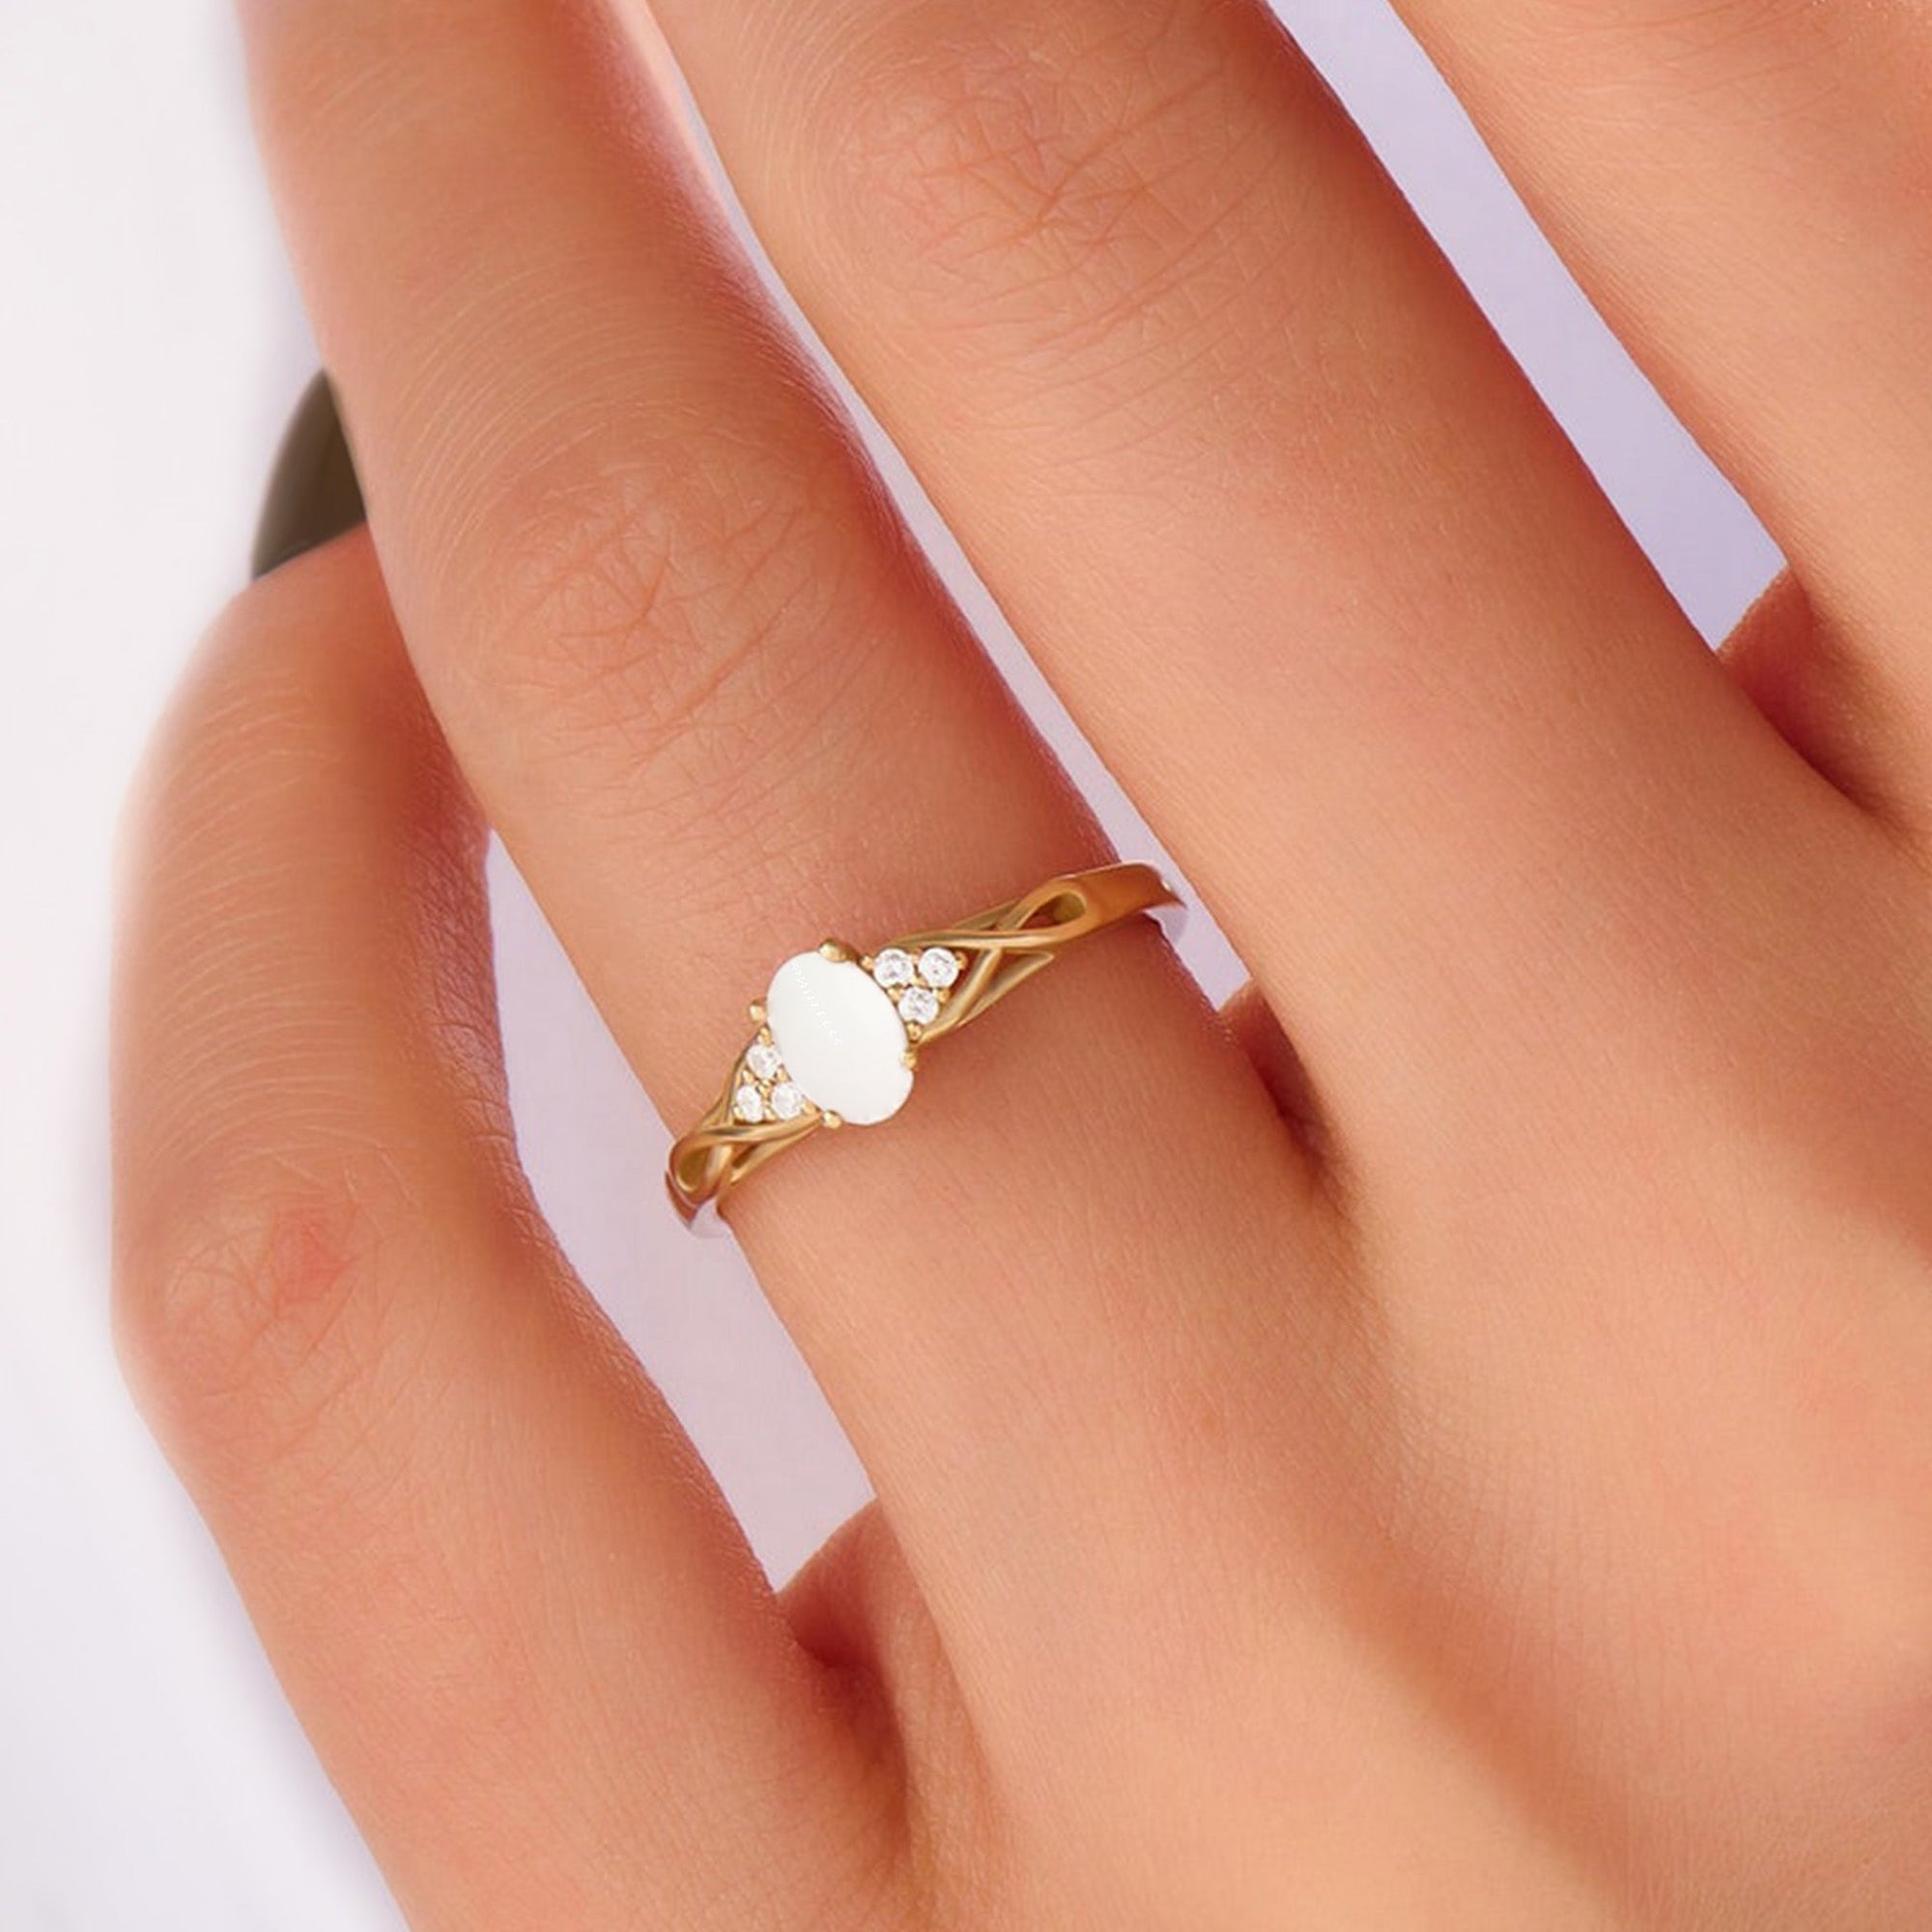 LullabyLove : Solid Gold Oval Breastmilk Ring